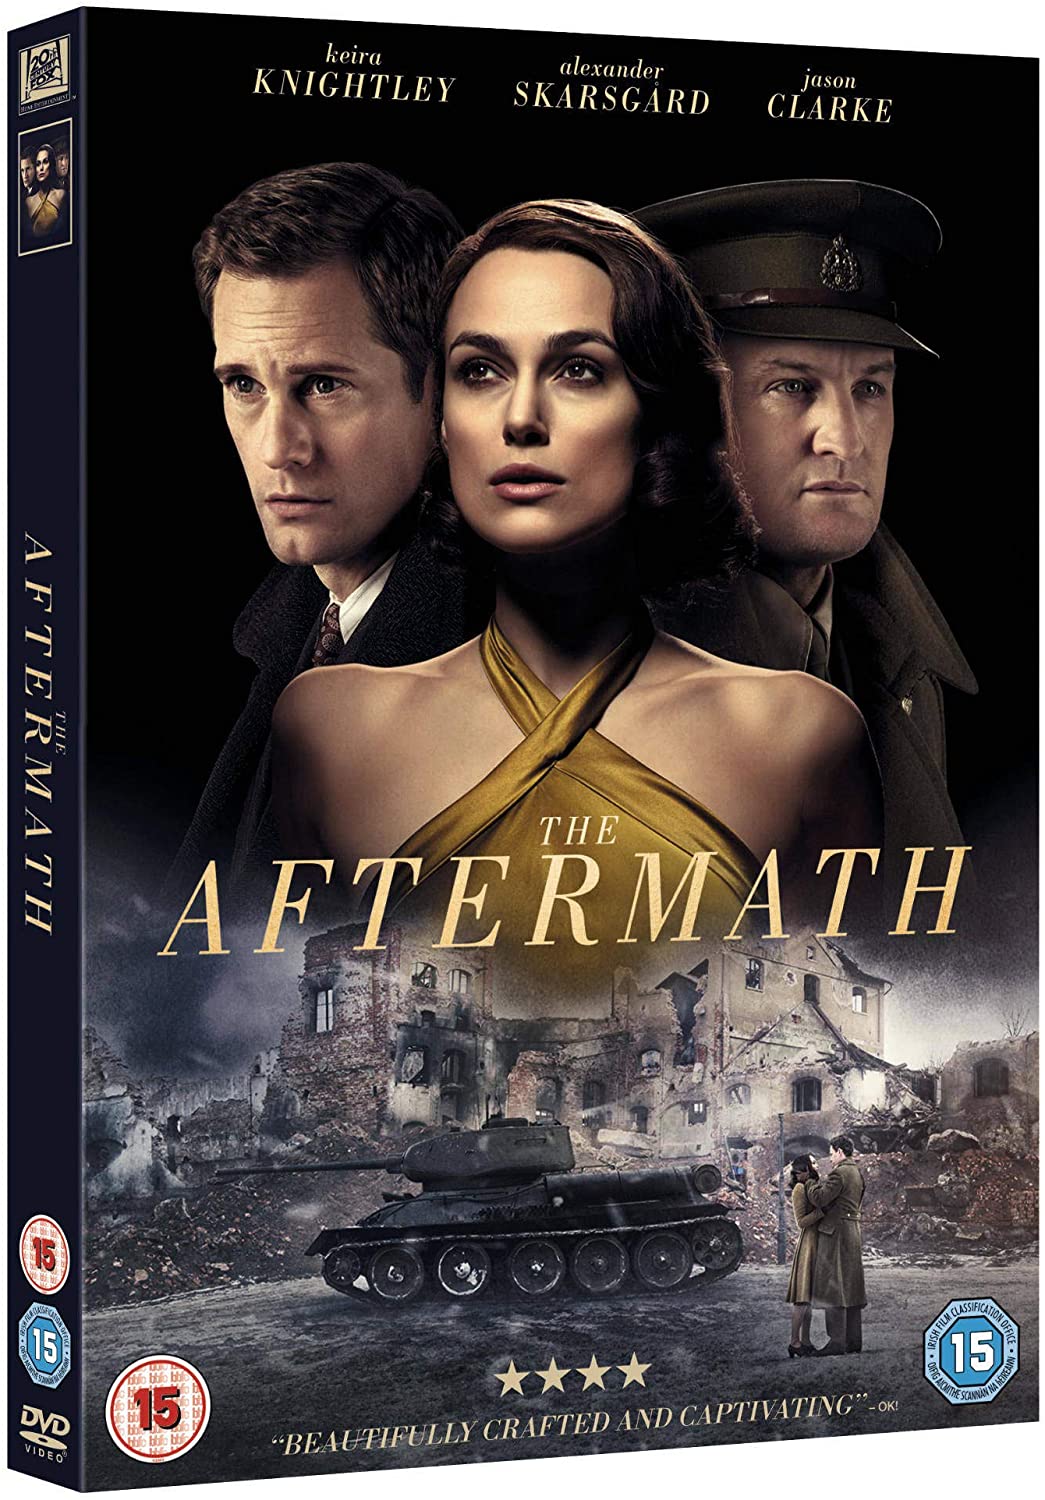 The Aftermath - Drama [DVD]